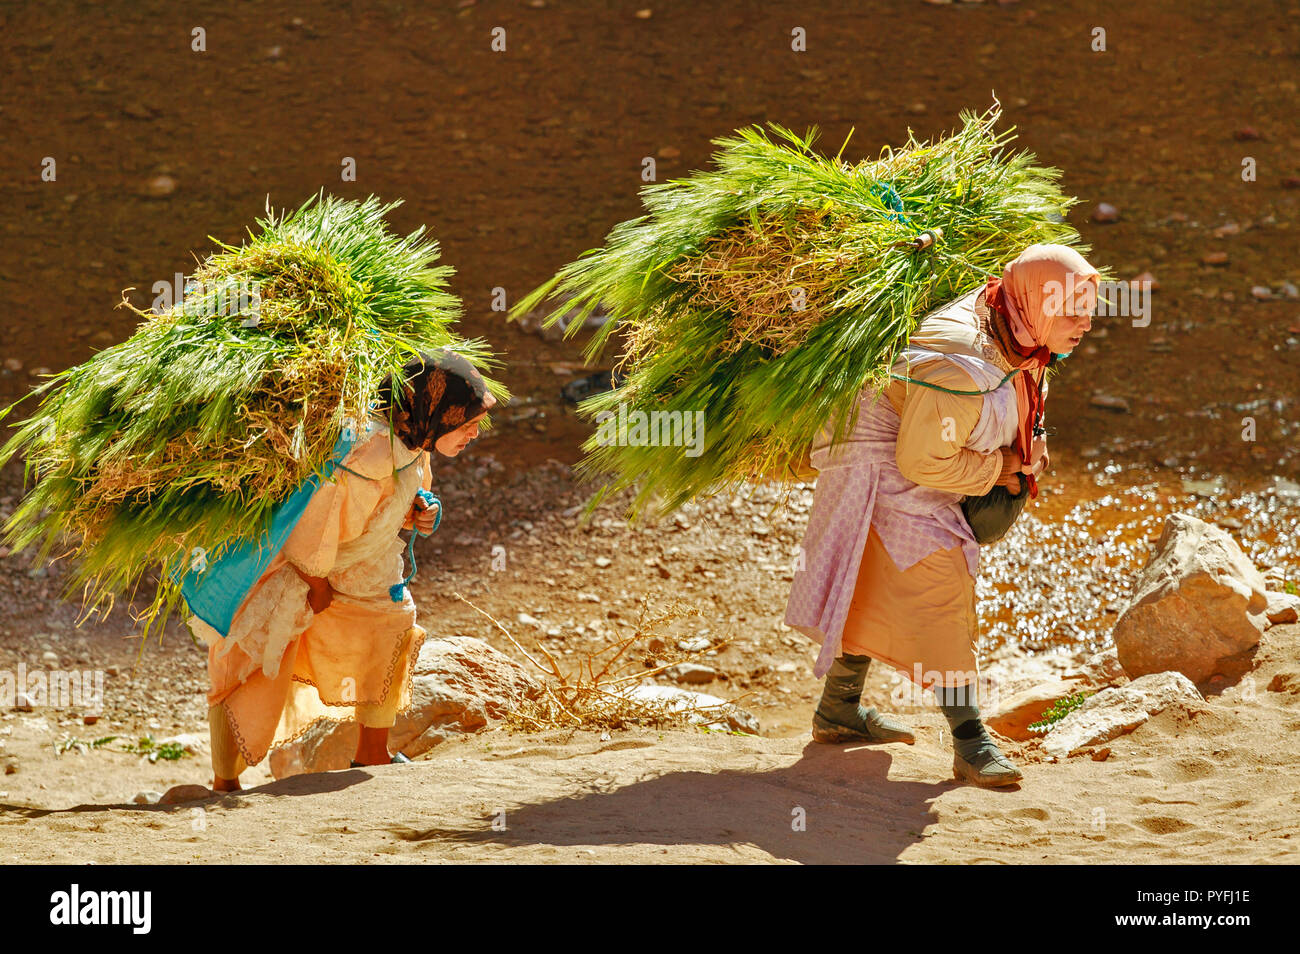 MOROCCO THE DADES GORGE TWO WOMEN CARRYING A HEAVY LOADS OF GREEN WHEAT FODDER FOR CATTLE Stock Photo